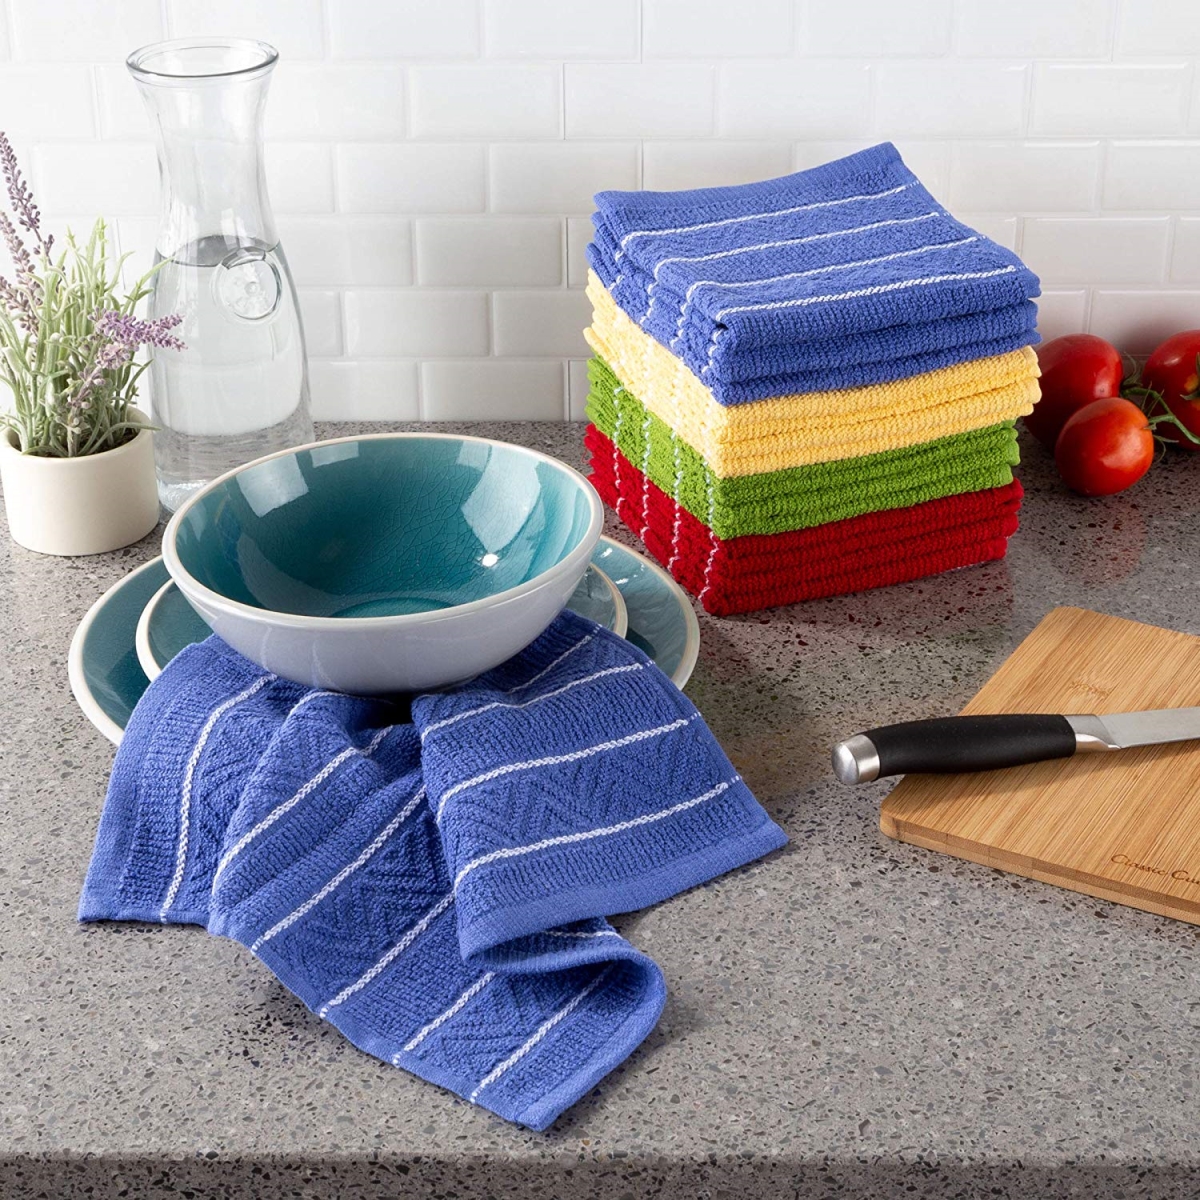 69a-39246 12.5 X 12.5 In. Home Kitchen Dish Cloth, Multi-color -set Of 16